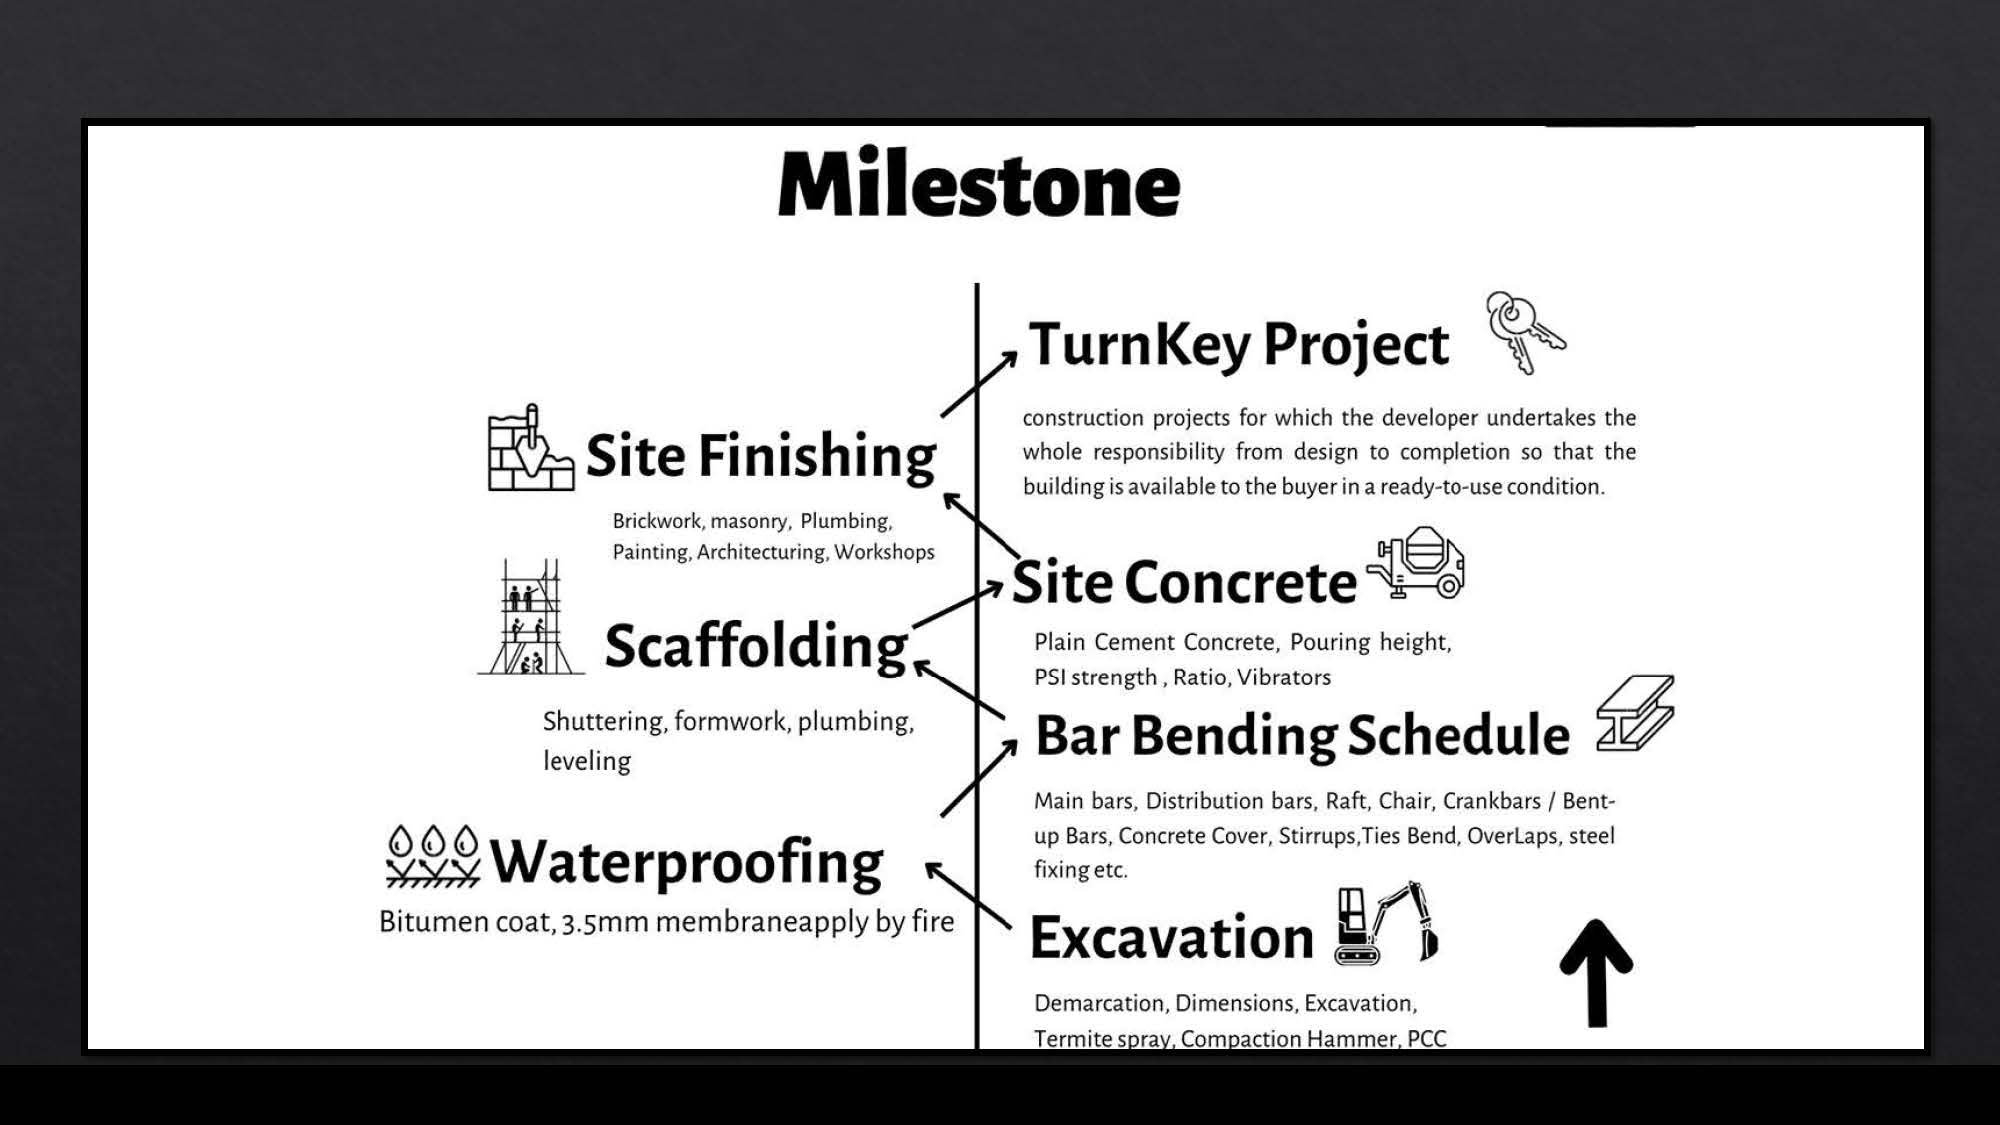 Milestone

.
TurnKey Project “>
construction projects for which the developer undertakes the

. *« .
ol Site Fi nishing whole responsibility from design to completion so that the

building is available to the buyer in a ready-to-use condition

Brickwork, masonry, Plumbing,
Painting, Architecturing, Workshops

. EN
Site Concrete
Scaffoldi ng Ran Cement Concrete, Pouring height,
Sl strength , Ratio, Vibrators
Shuttering, formwork, plumbing, Bar Bending Schedule <b

leveling

Main bars, Distribution bars, Raft, Chair, Crankbars / Bent-
© © © up Bars, Concrete Cover, Stirrups, Ties Bend, Overlaps, steel

wv» Waterproofing Ringe
Bitumen coat, 3.5mm membraneapply by fire Excavation E
LJ

Demarcation, Dimensions, Excavation,